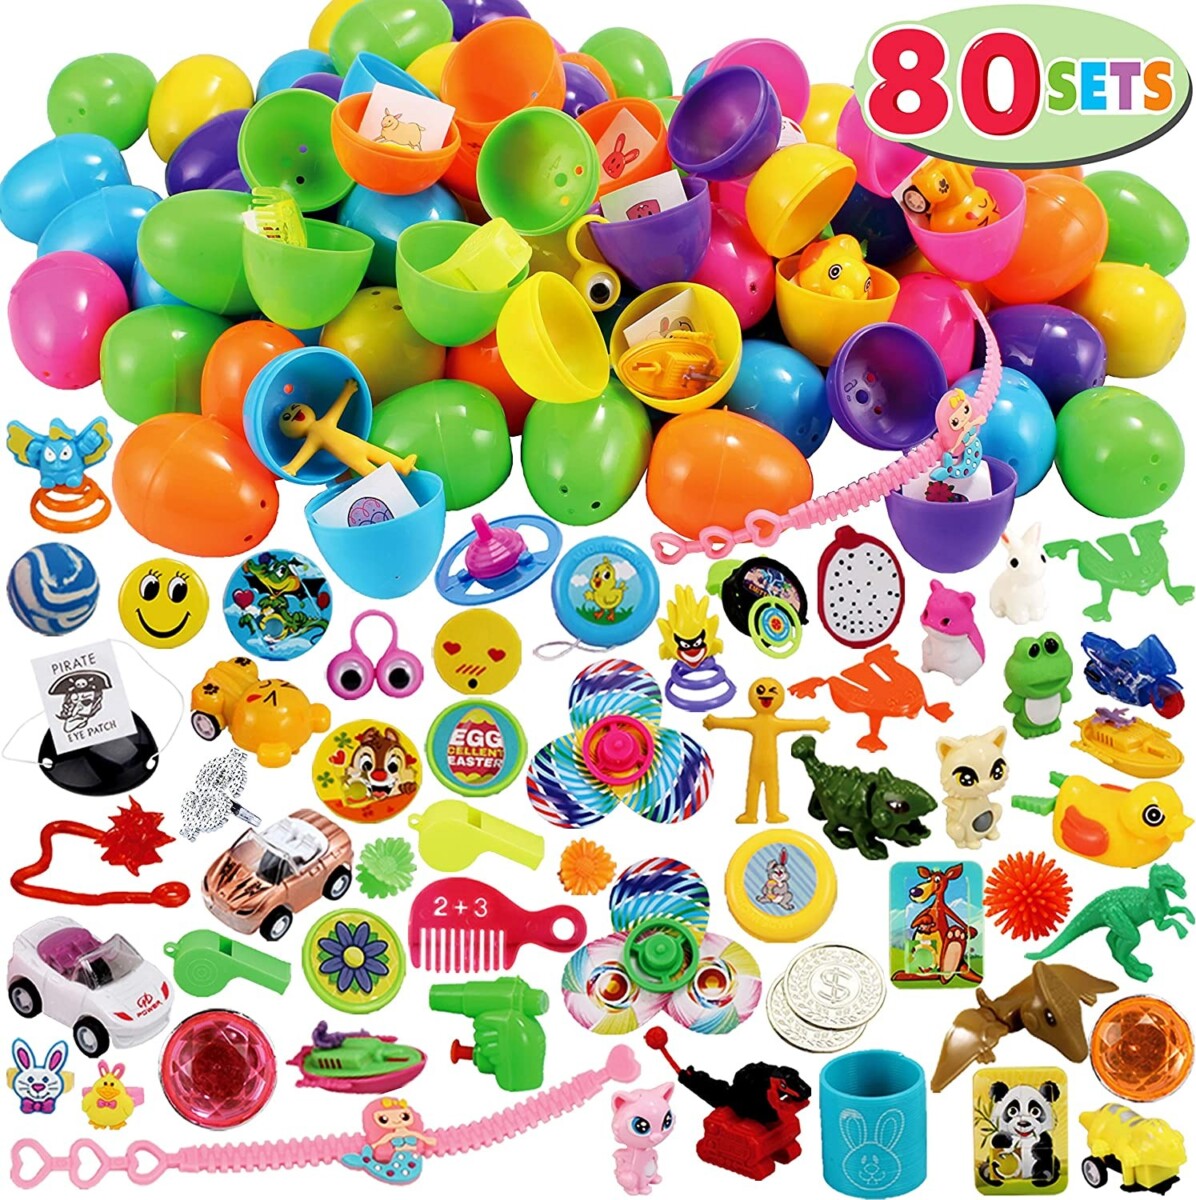 Alea's Deals 80 Sets Prefilled Easter Eggs with Novelty Toys-40%OFF  